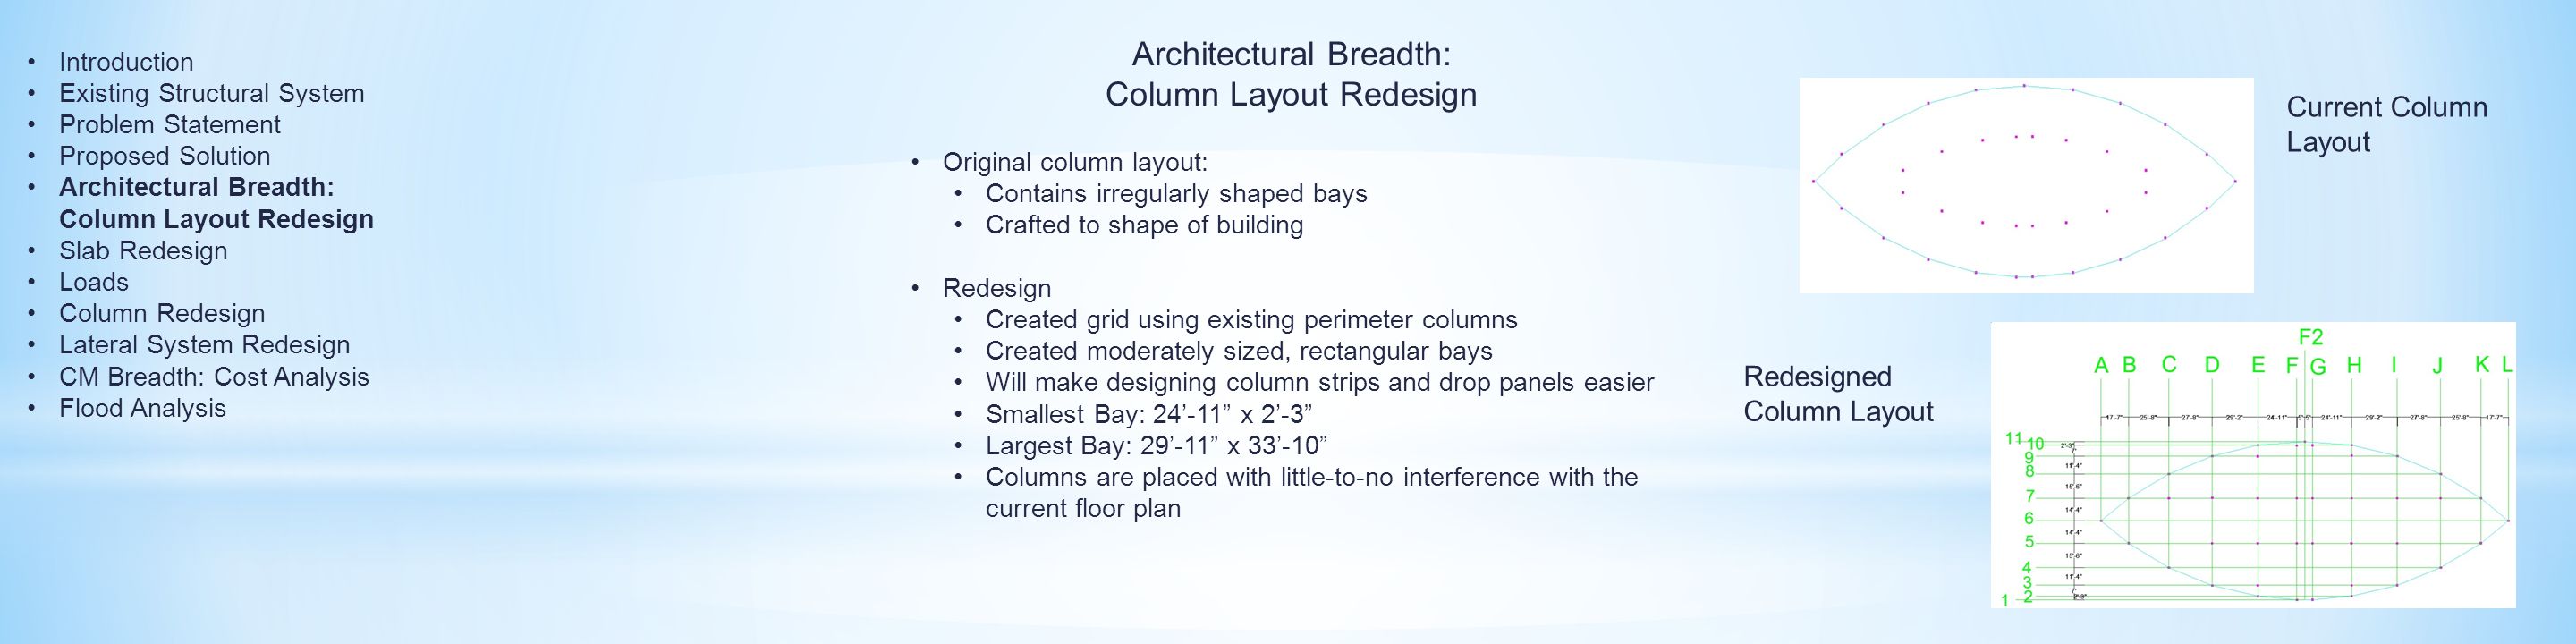 Architectural Breadth: Column Layout Redesign Current Column Layout Redesigned Column Layout Introduction Existing Structural System Problem Statement Proposed Solution Architectural Breadth: Column Layout Redesign Slab Redesign Loads Column Redesign Lateral System Redesign CM Breadth: Cost Analysis Flood Analysis Original column layout: Contains irregularly shaped bays Crafted to shape of building Redesign Created grid using existing perimeter columns Created moderately sized, rectangular bays Will make designing column strips and drop panels easier Smallest Bay: 24’-11 x 2’-3 Largest Bay: 29’-11 x 33’-10 Columns are placed with little-to-no interference with the current floor plan